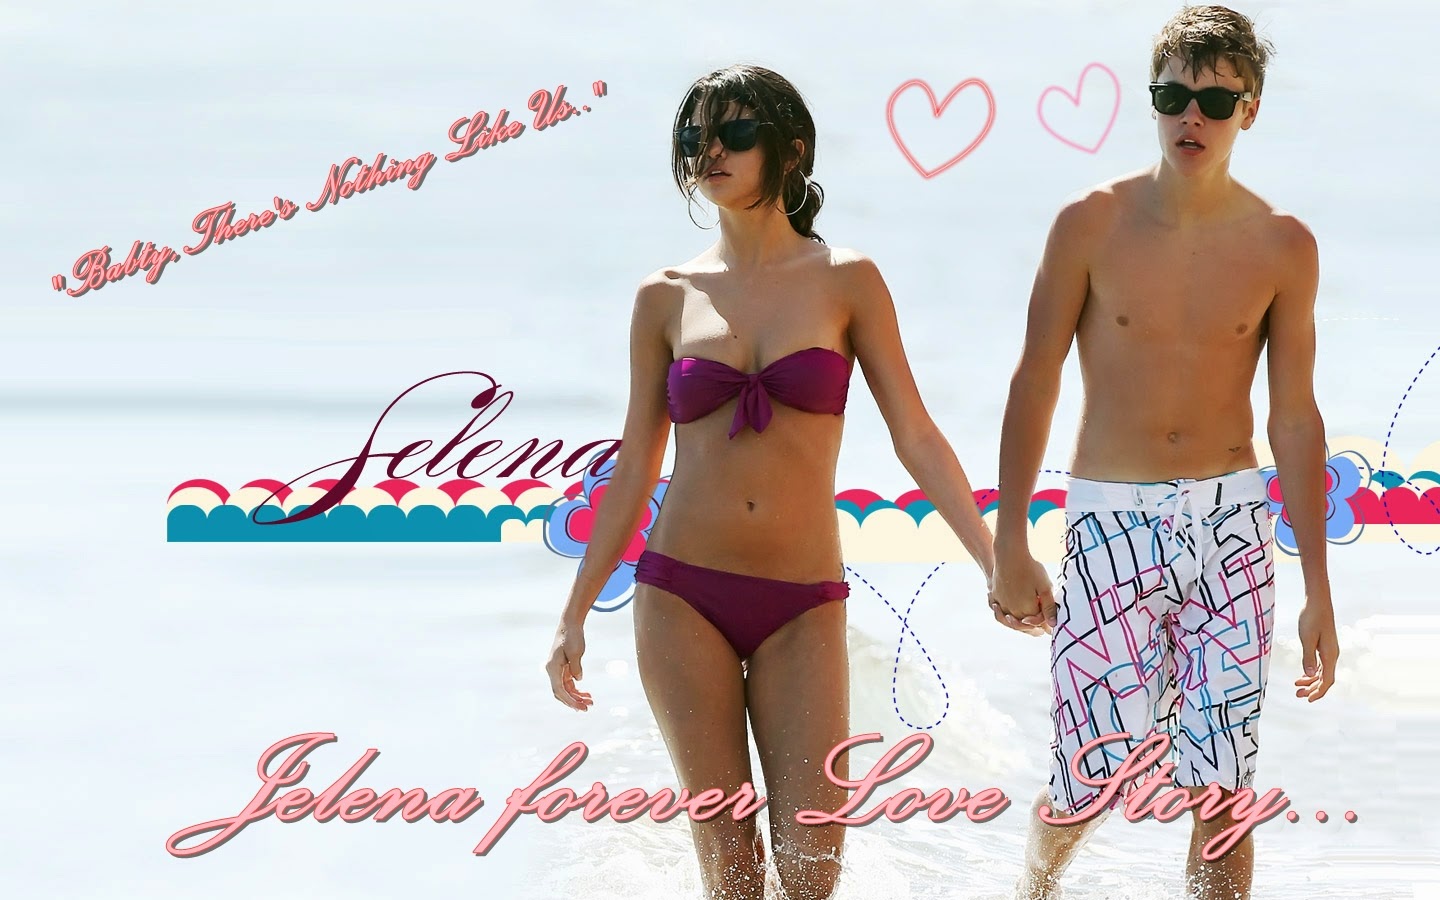 "Baby,There's Nothing Like Us.."-Jelena forever love story